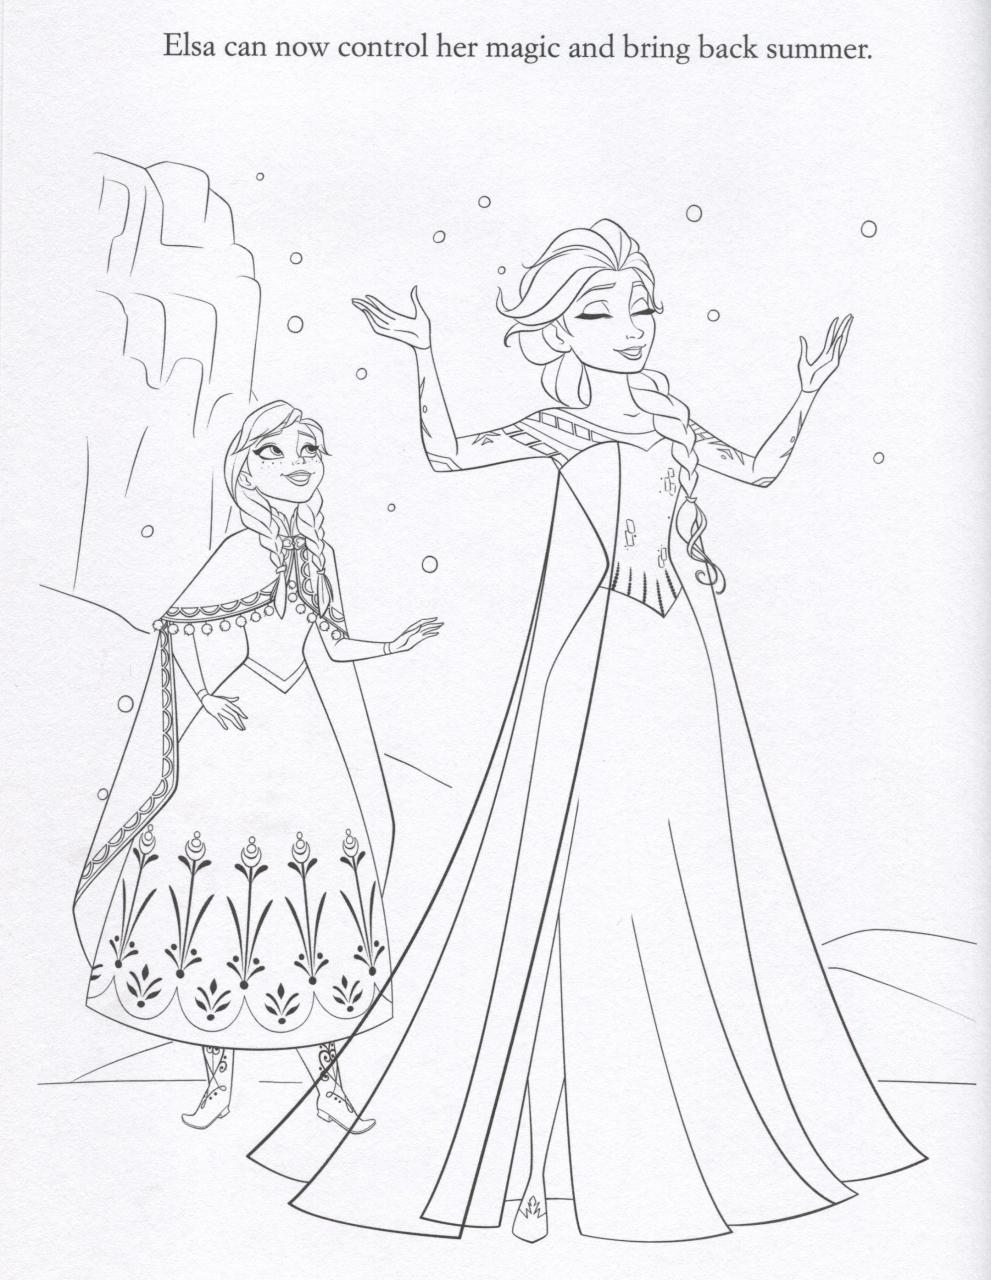 Frozen Anna And Elsa Coloring Pages